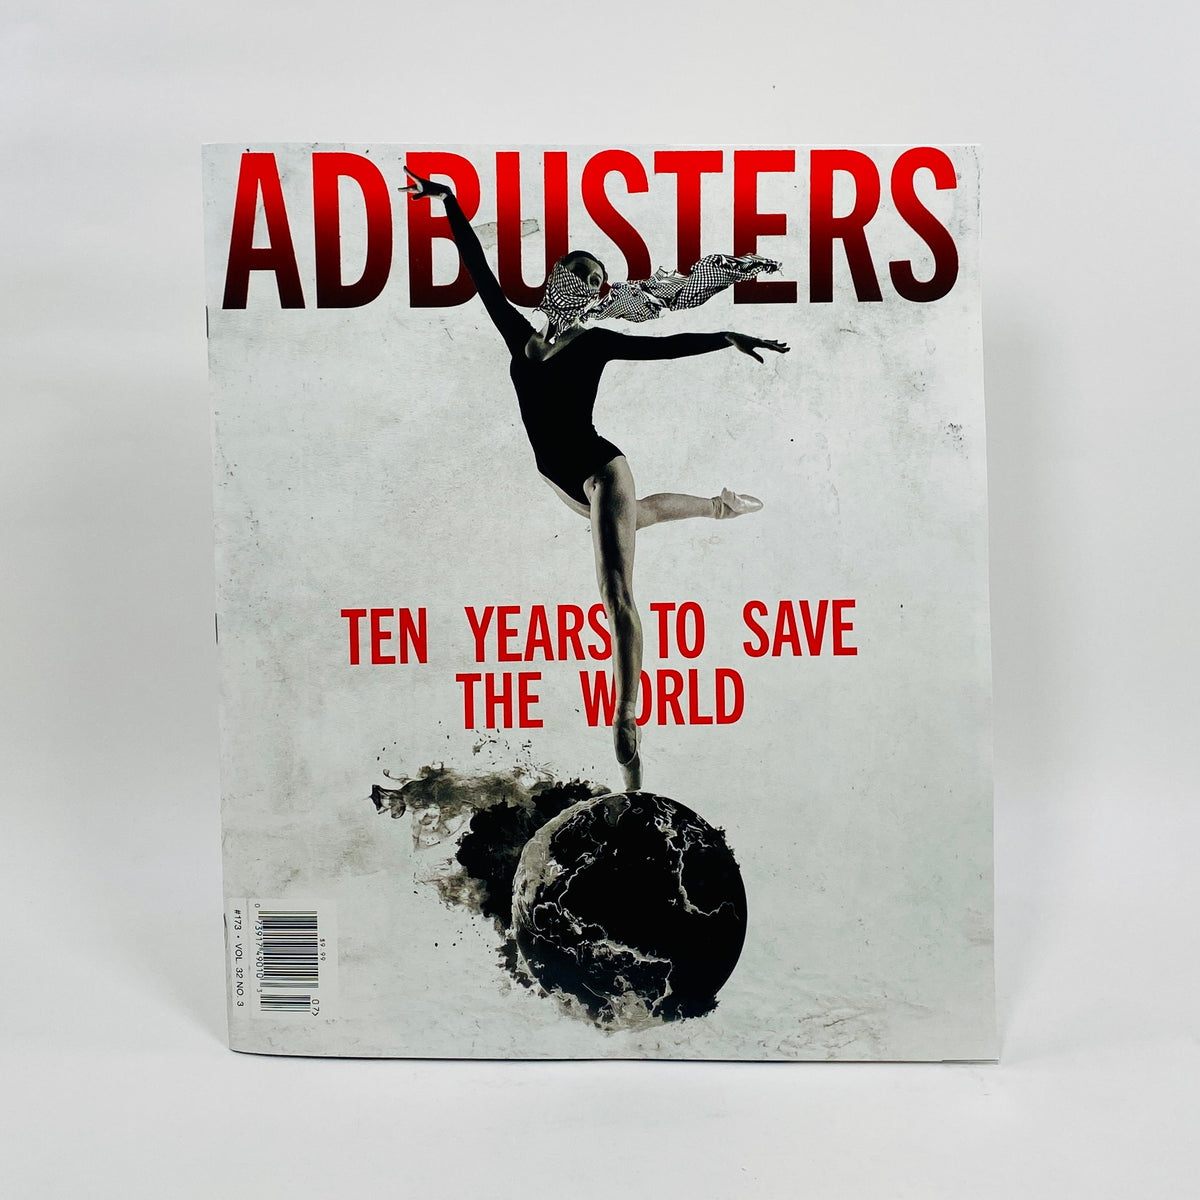 Adbusters #173 - Ten Years to Save the World